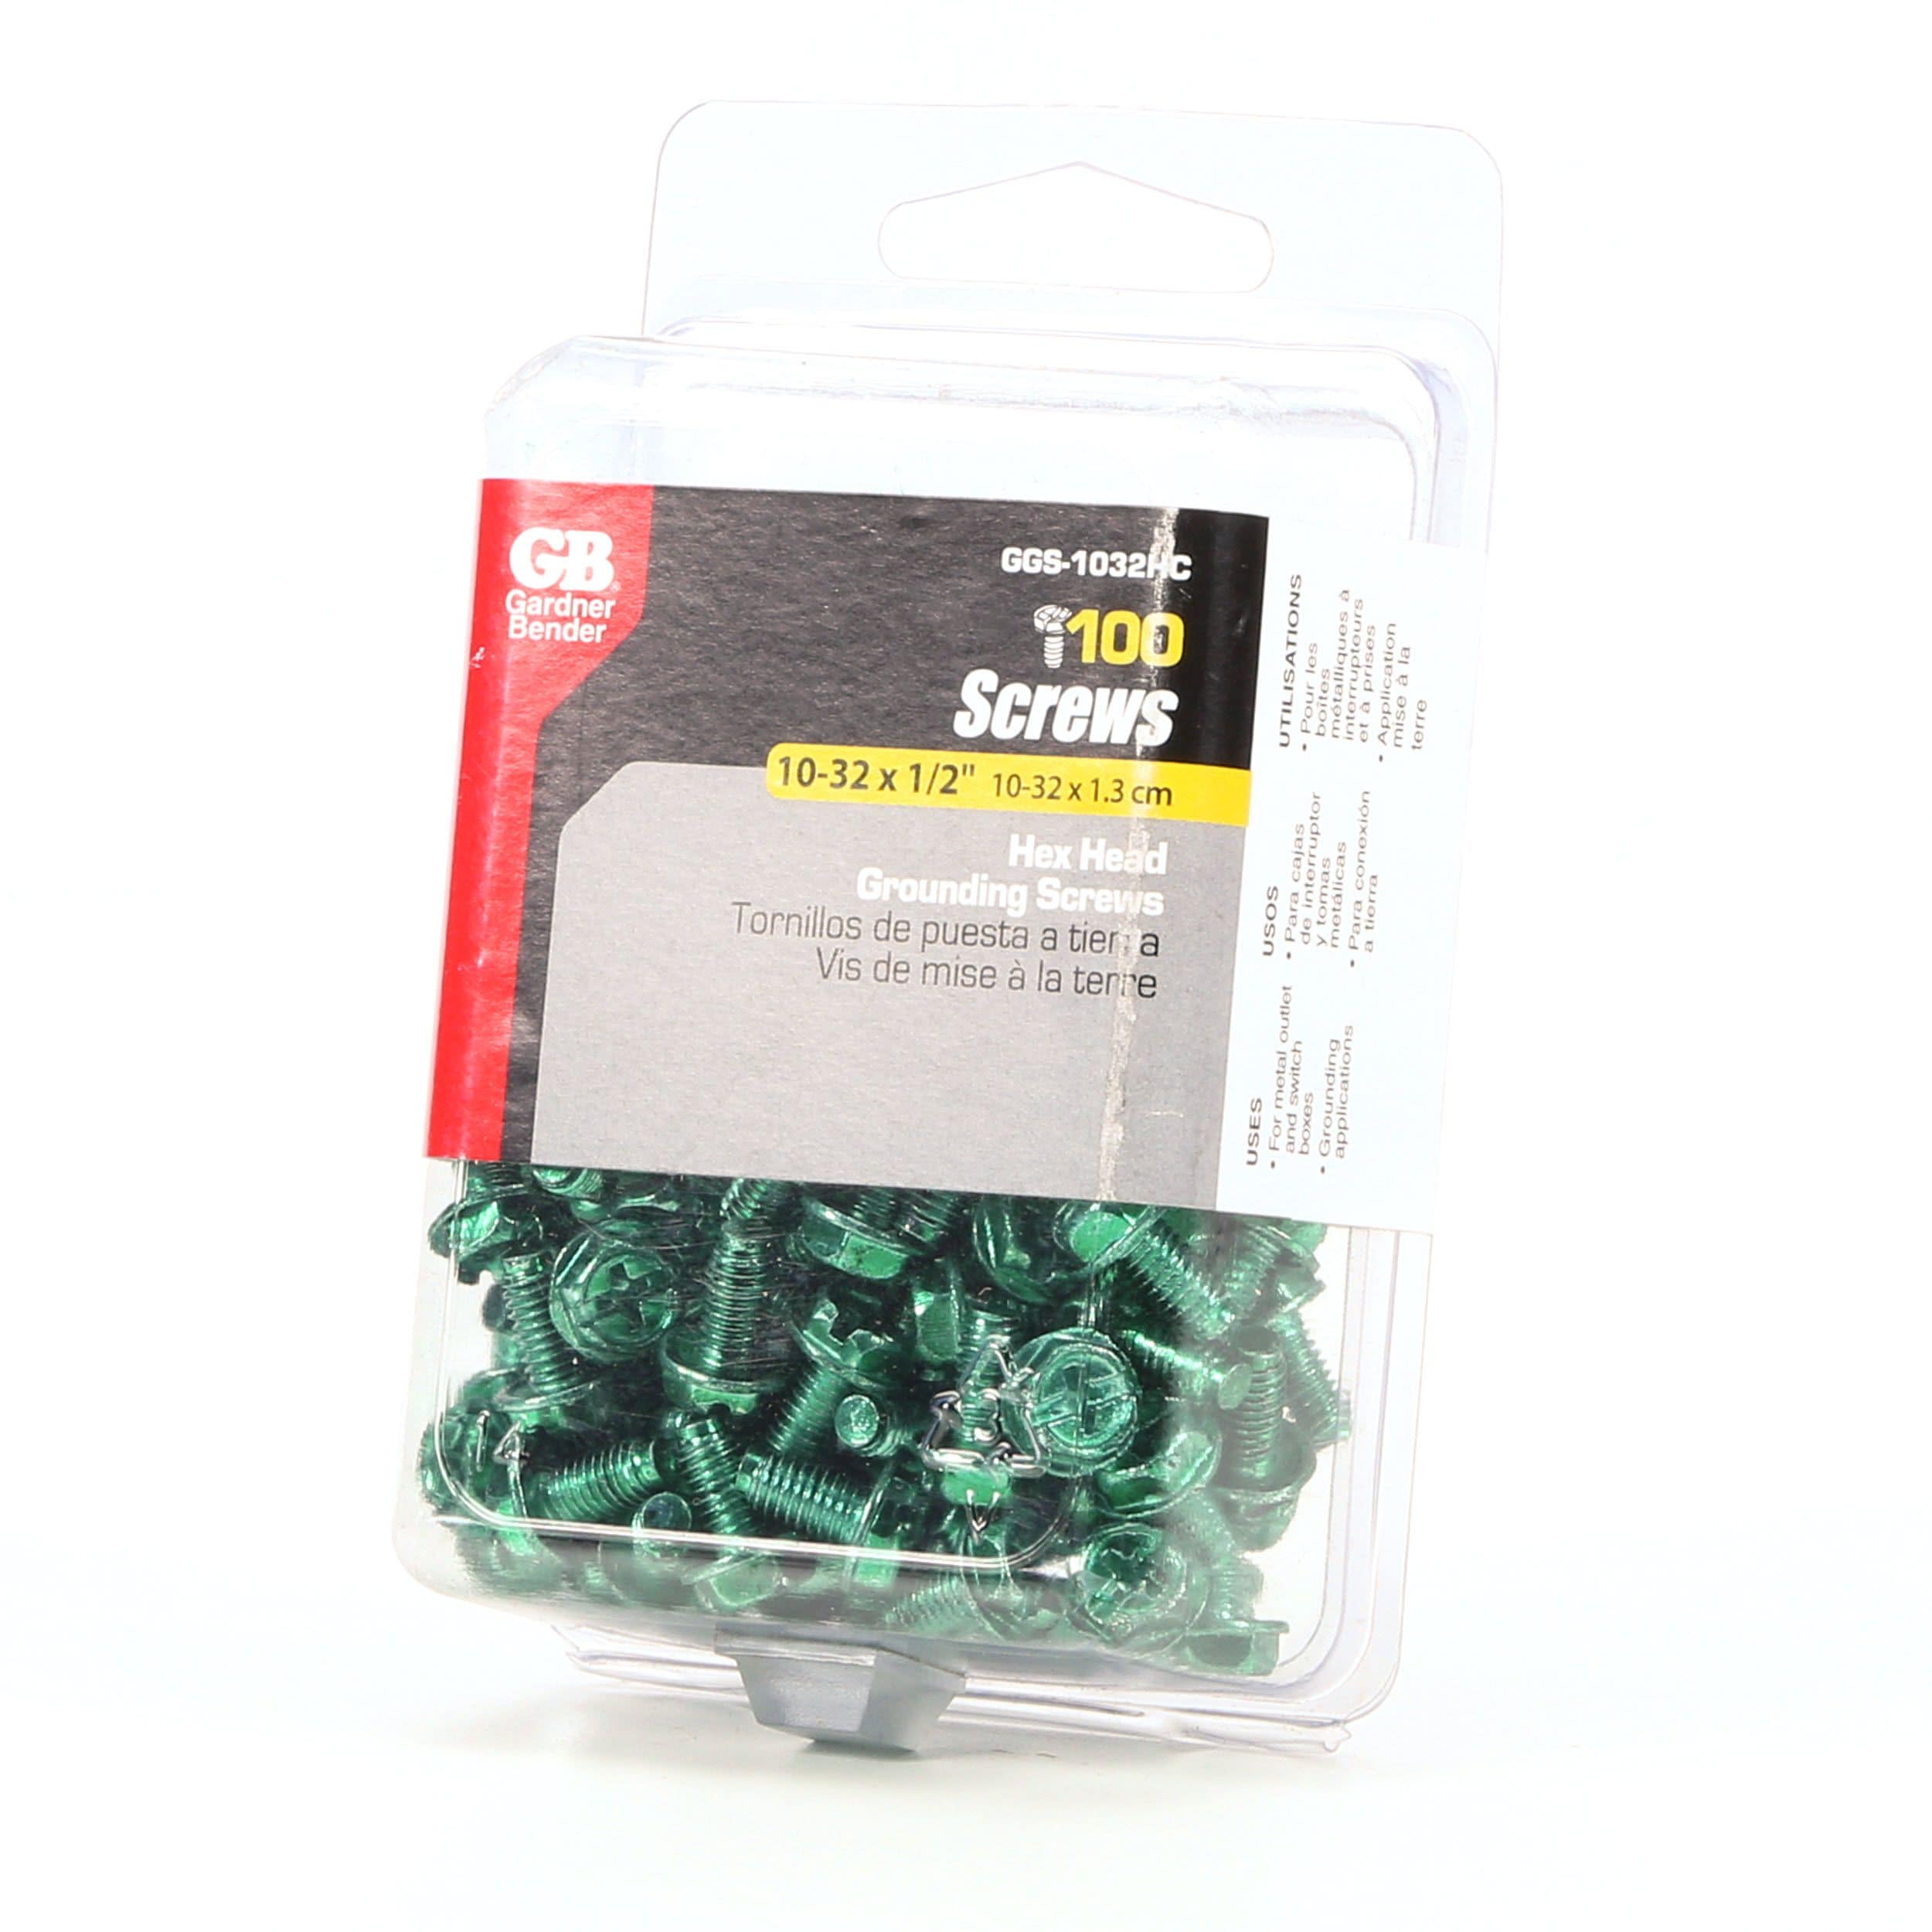 25 Gardner Bender Green Grounding Wire Connectors Twist Conical Connector Nuts for sale online 